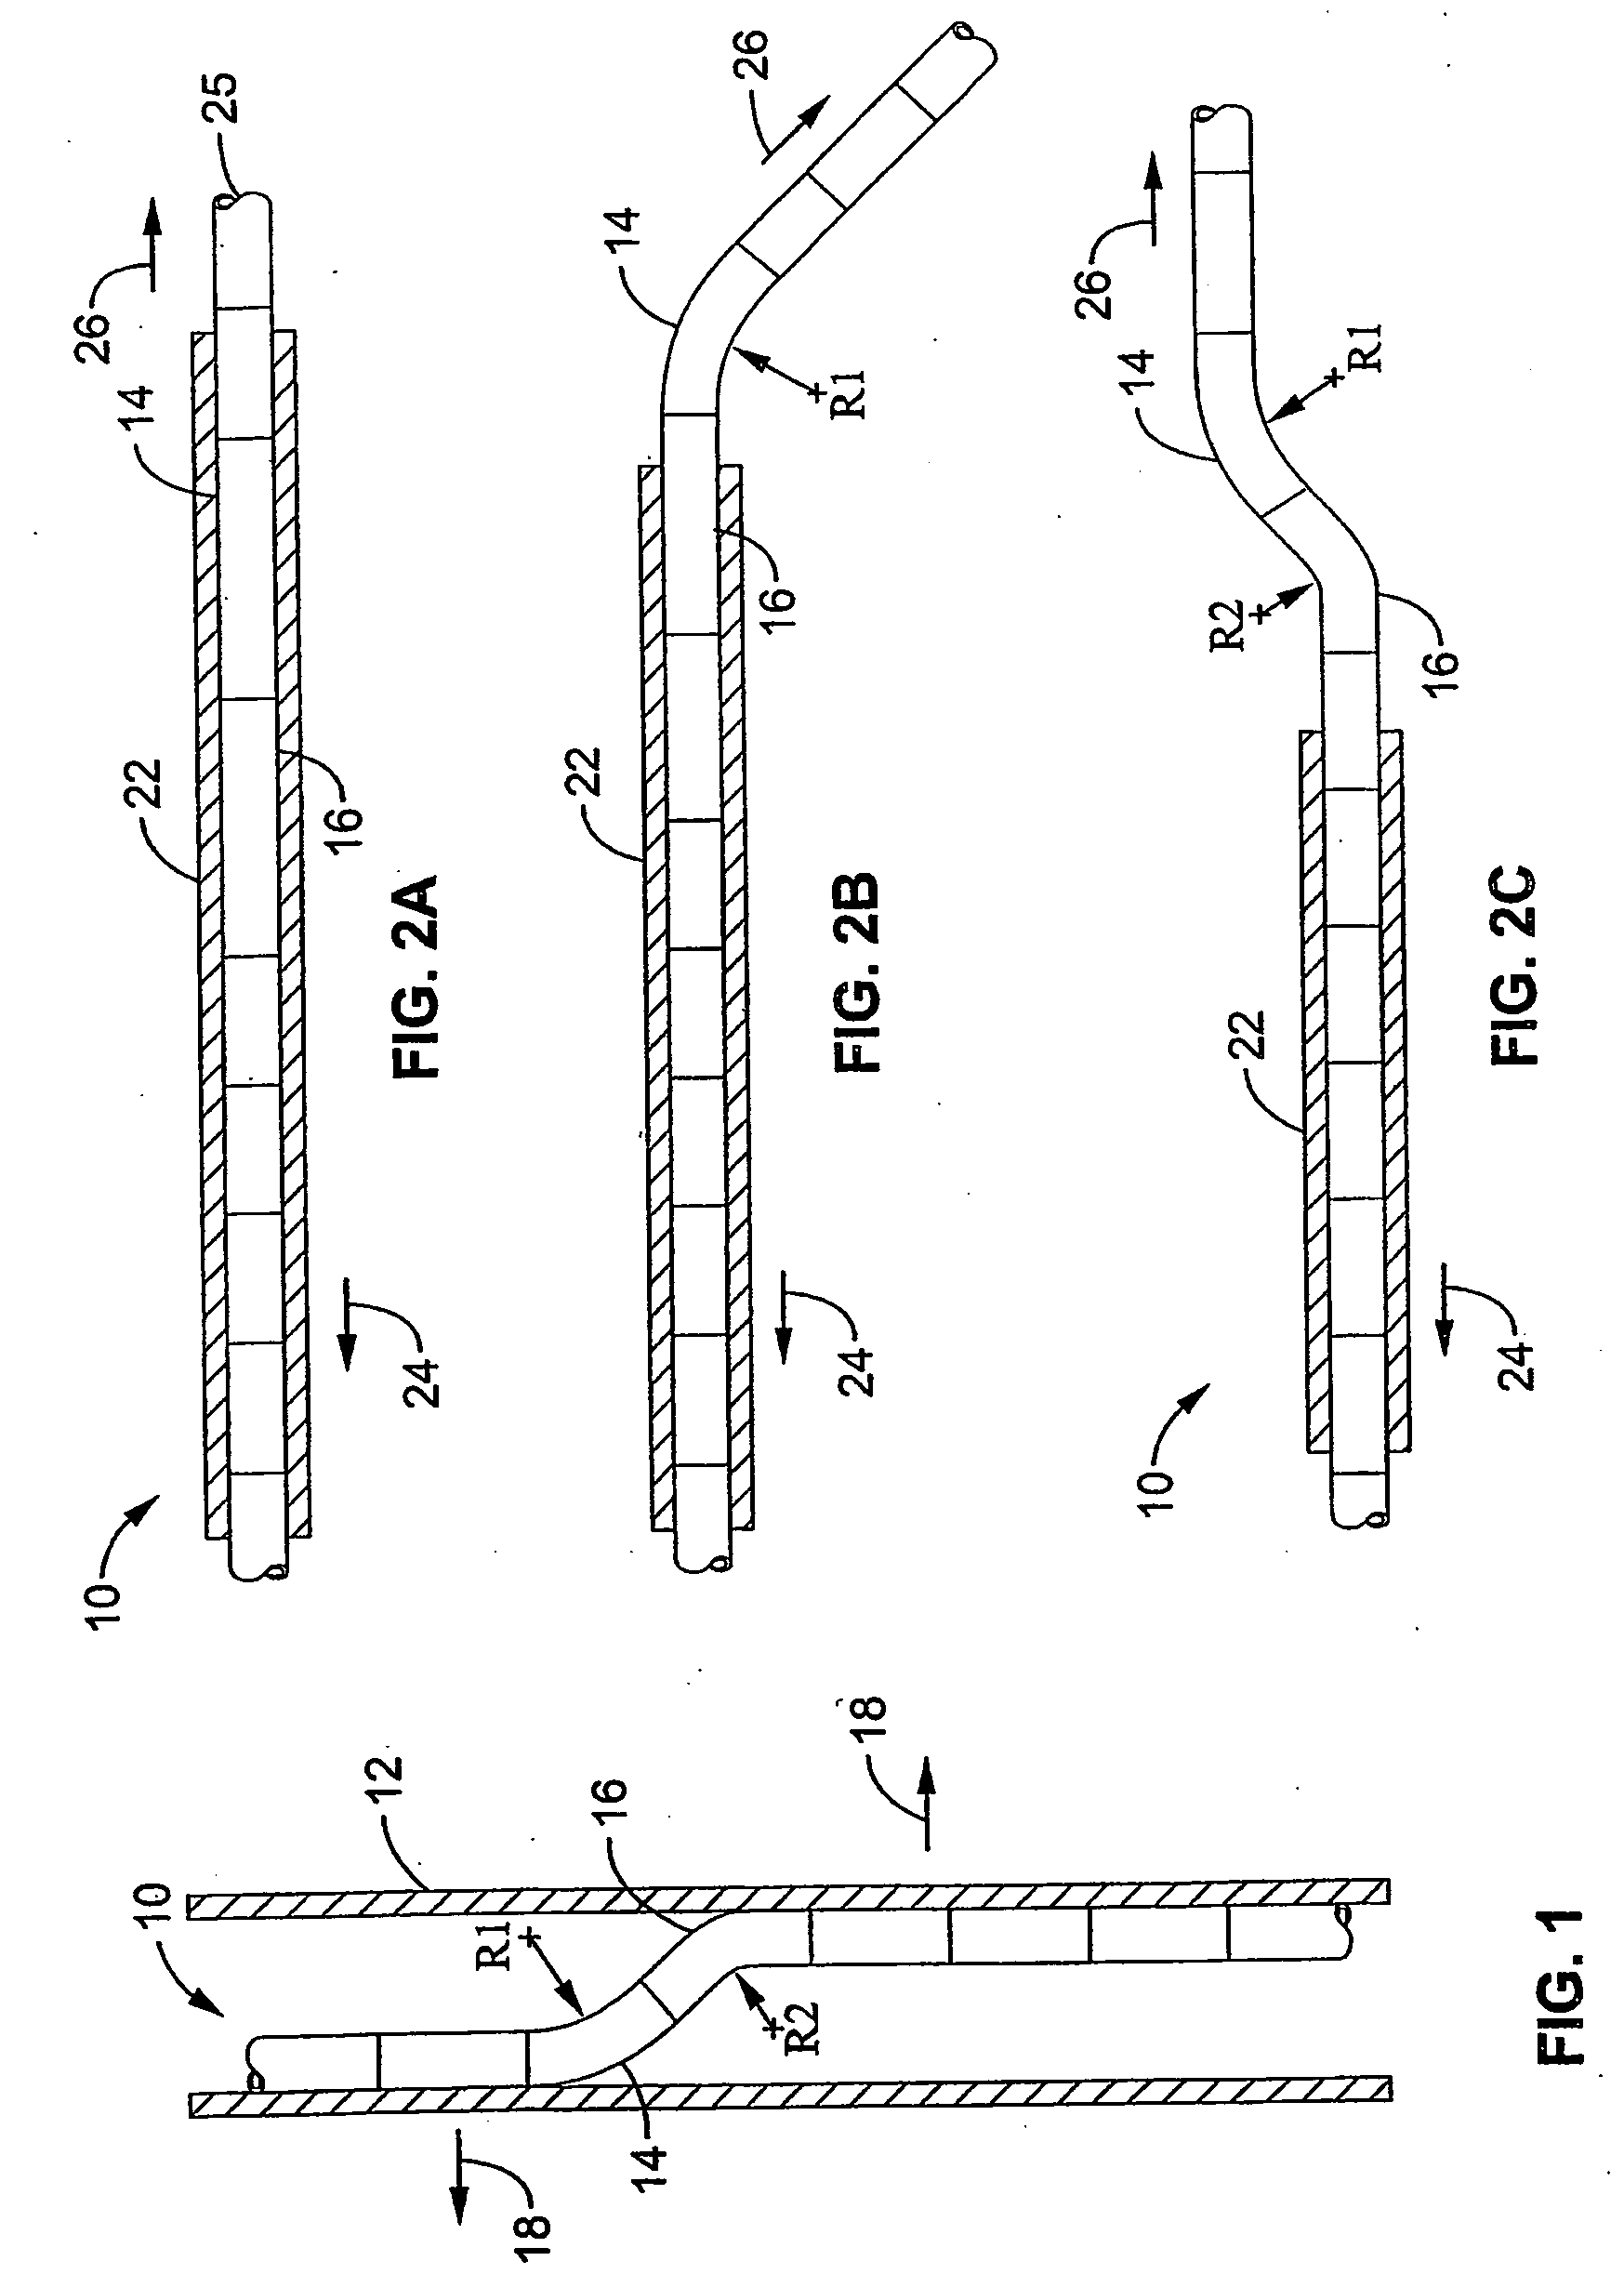 Systems and methods for performing bi-lateral interventions or diagnosis in branched body lumens